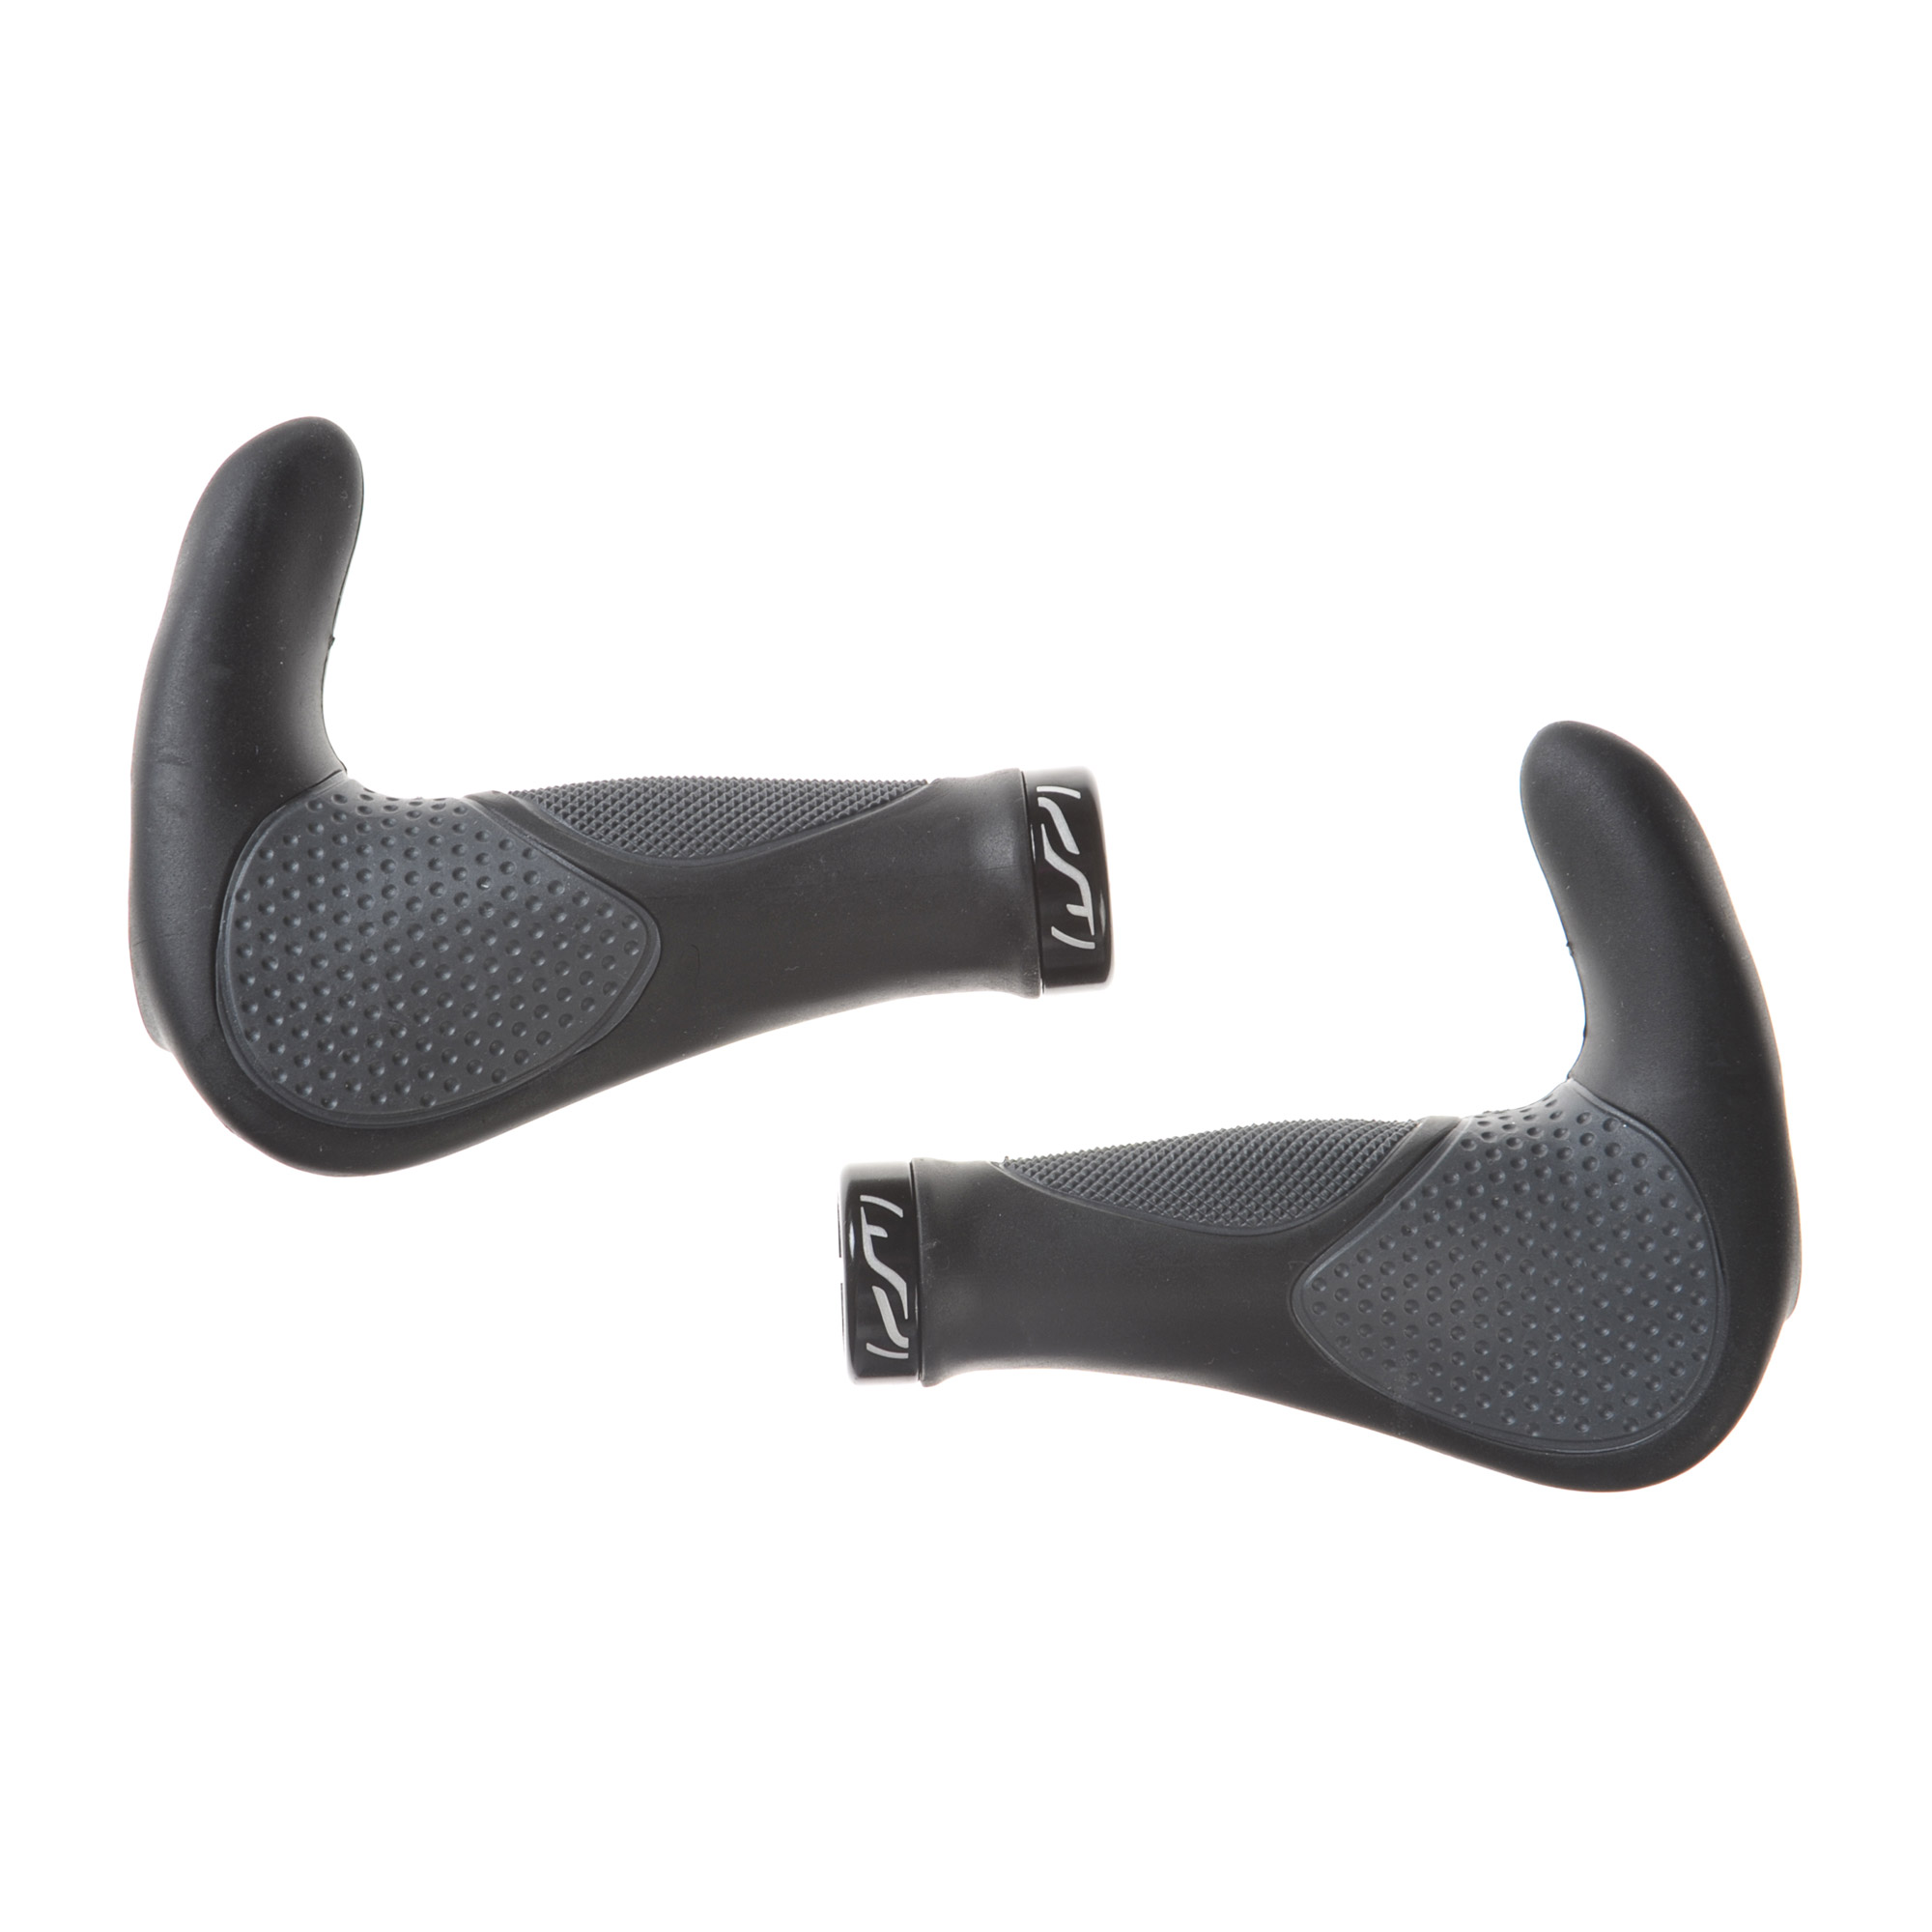 Contec Tour Deluxe Pro Bike Grips with BarEnds 140 mm